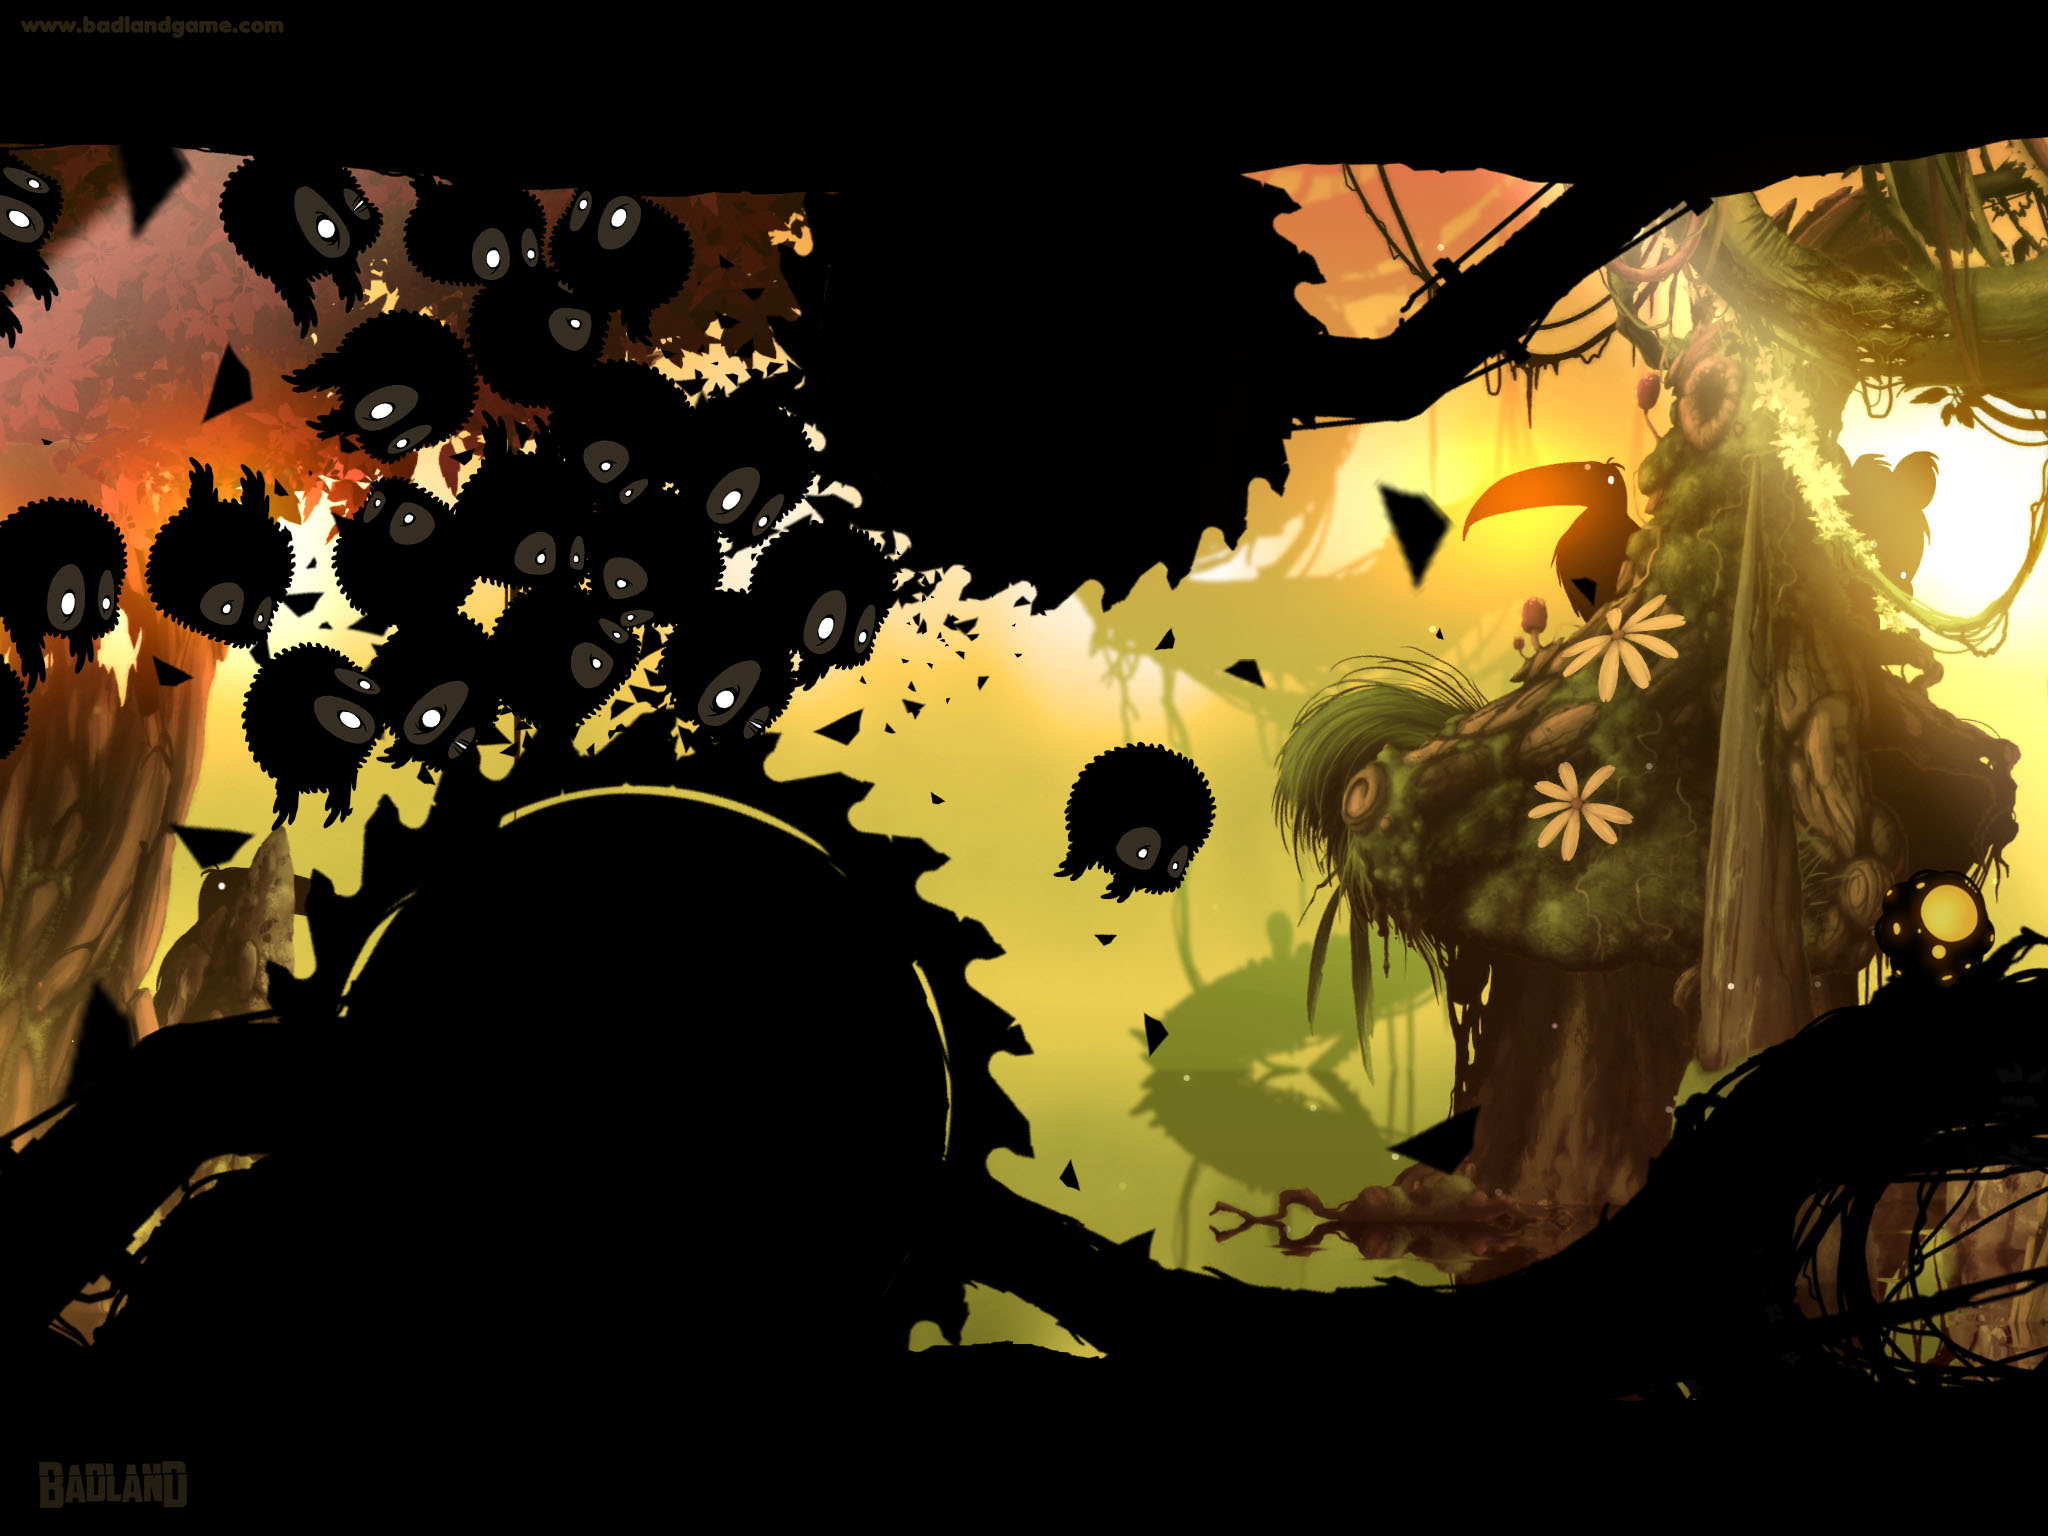 Badland: Game of the Year Edition arrives on Xbox One on May 29